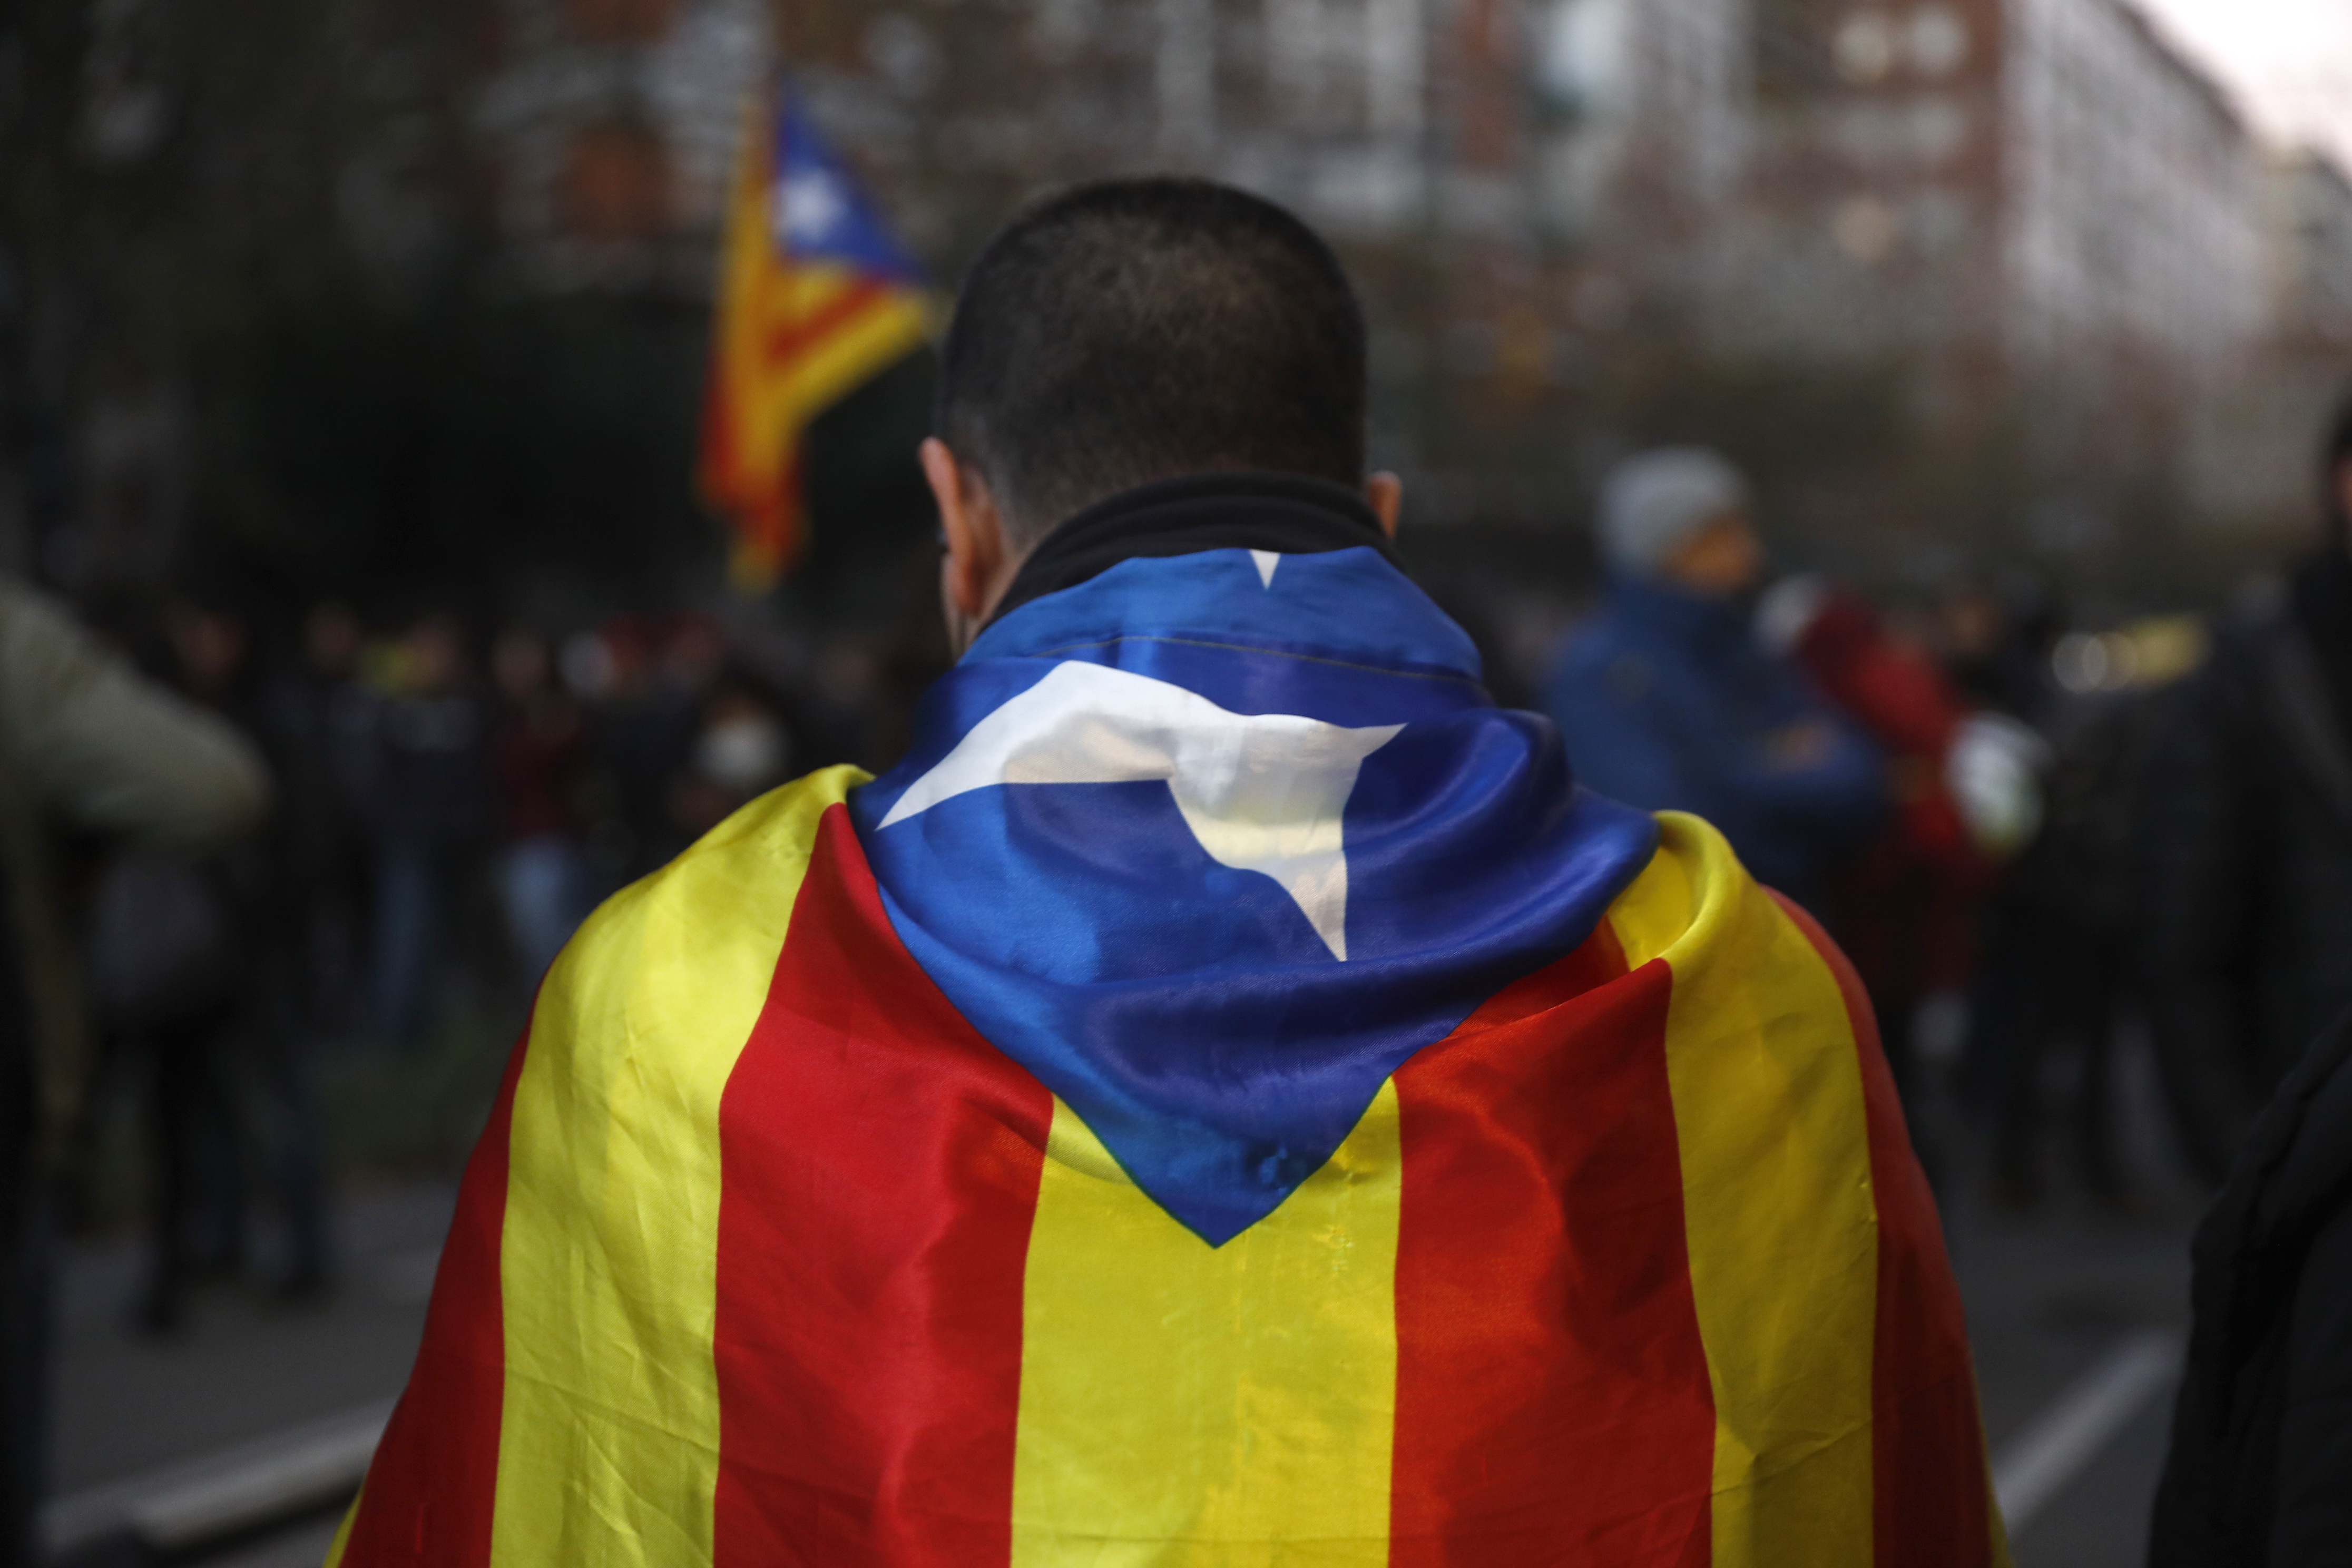 A pro-independence demonstrator stands in downtown Barcelona, Spain, Friday Dec. 21, 2018. Catalan authorities say pro-independence protesters angry about Spain's Cabinet holding a meeting in Barcelona have blocked a major highway and dozens of roads, disrupting traffic to and from the city.(AP Photo/Santi Palacios)